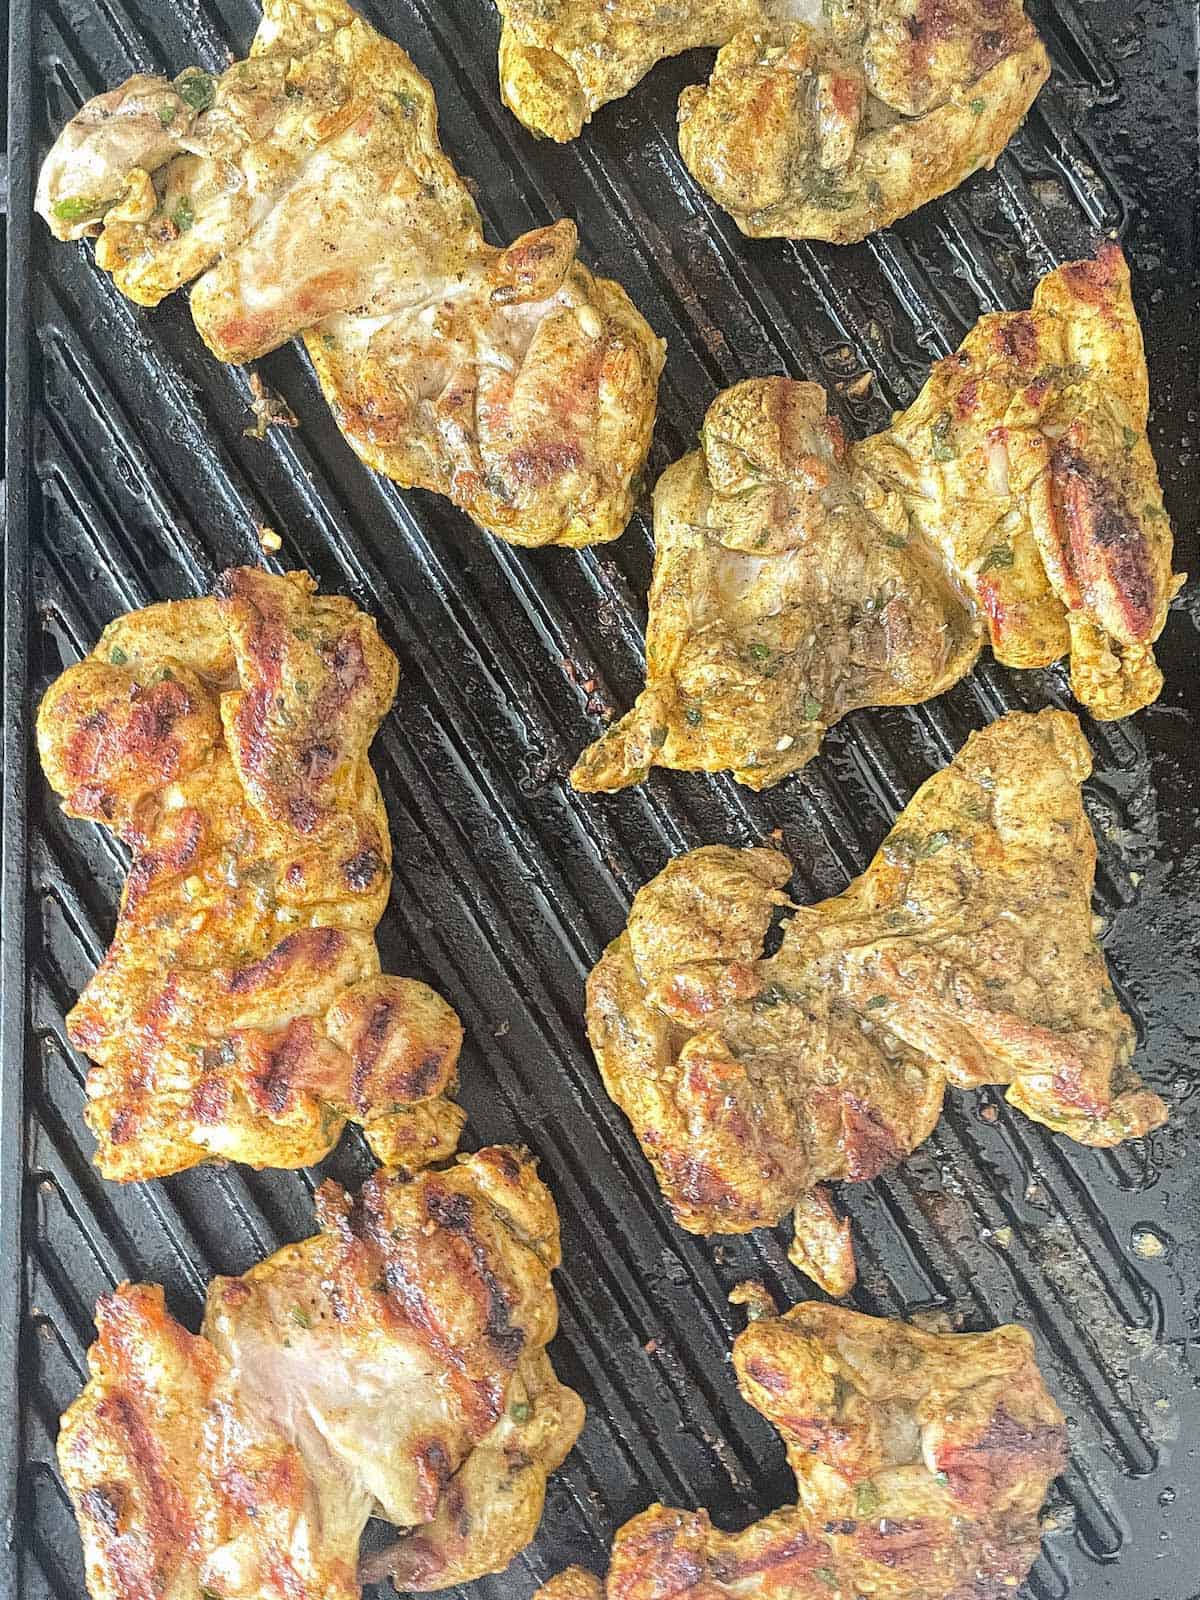 Grilled Israeli chicken thighs on a grill pan.